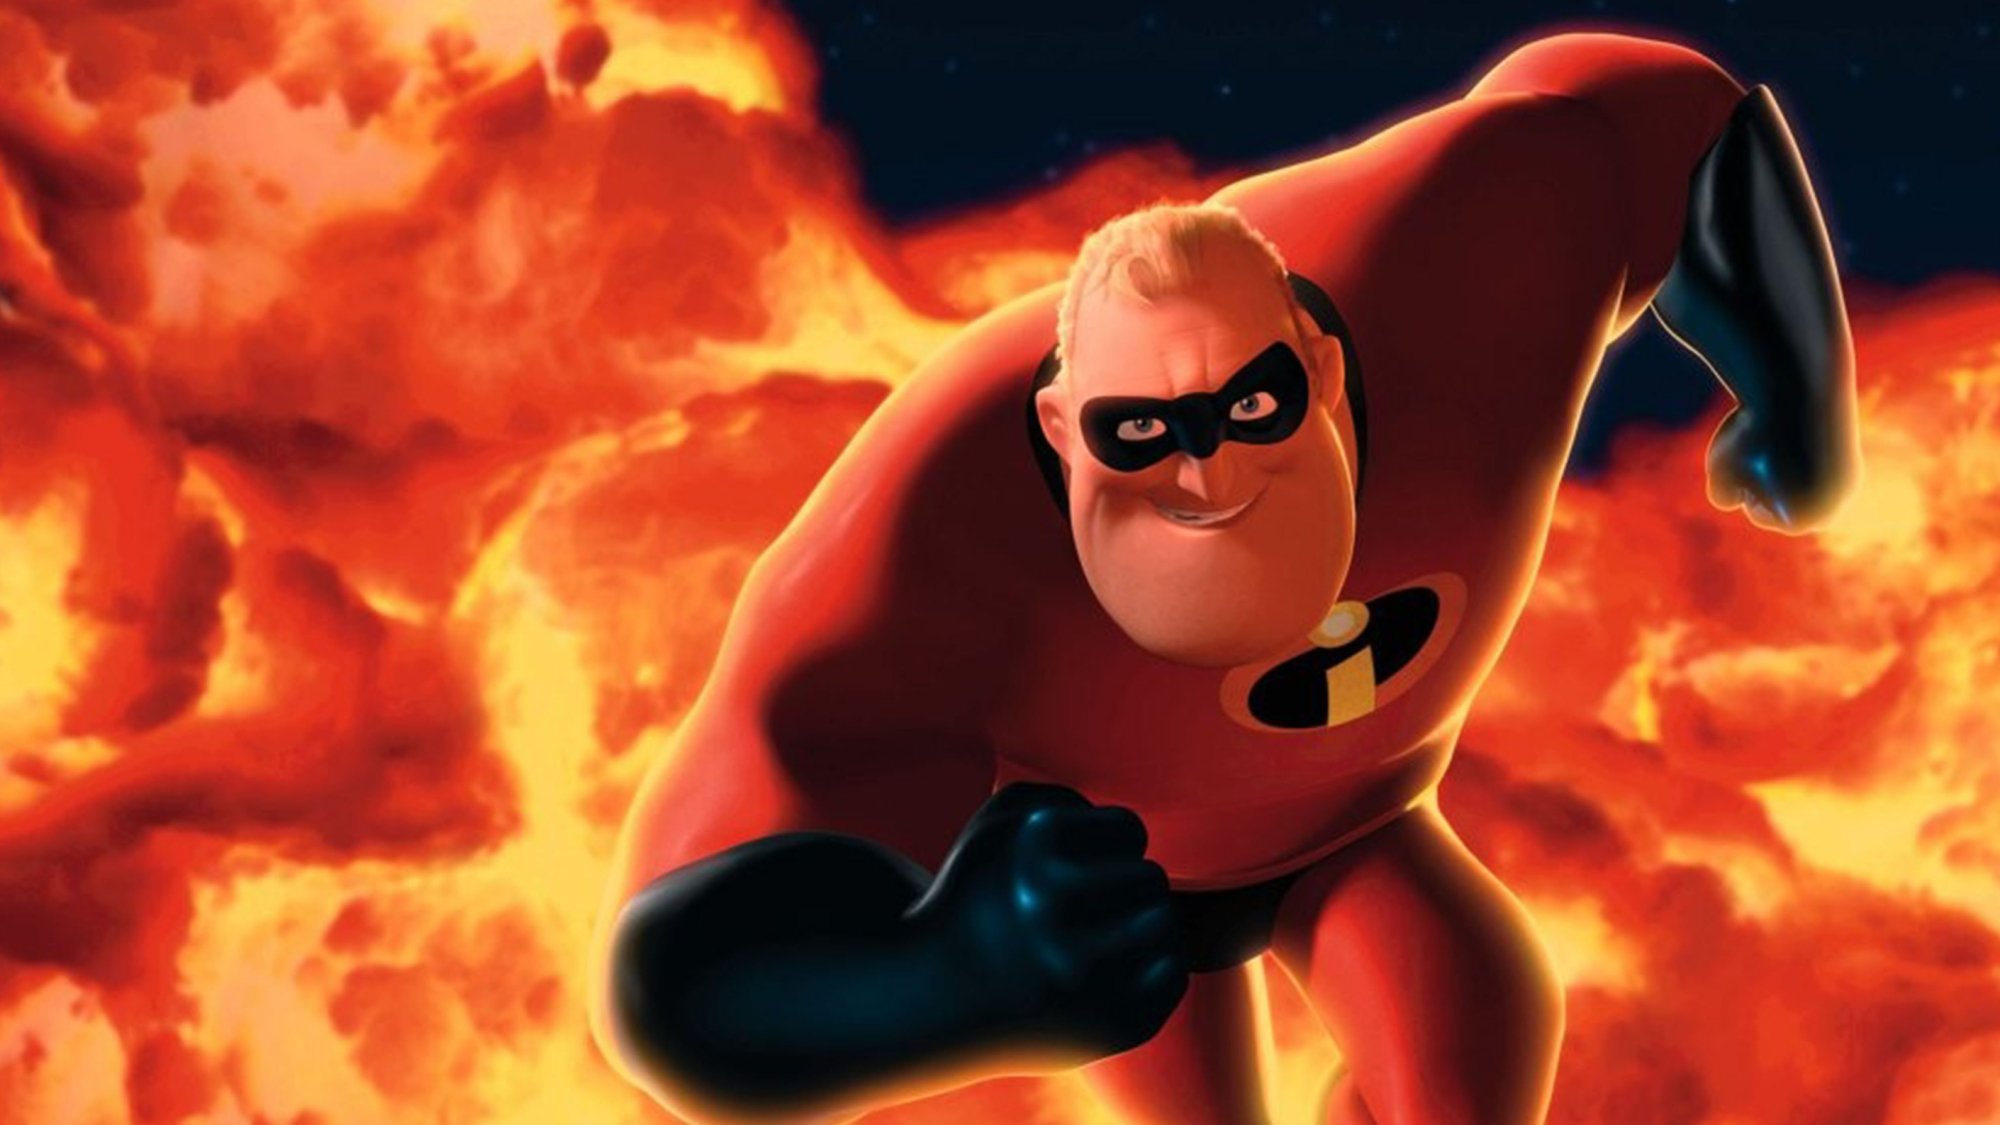 Mr. Incredible jumping out of a fire.